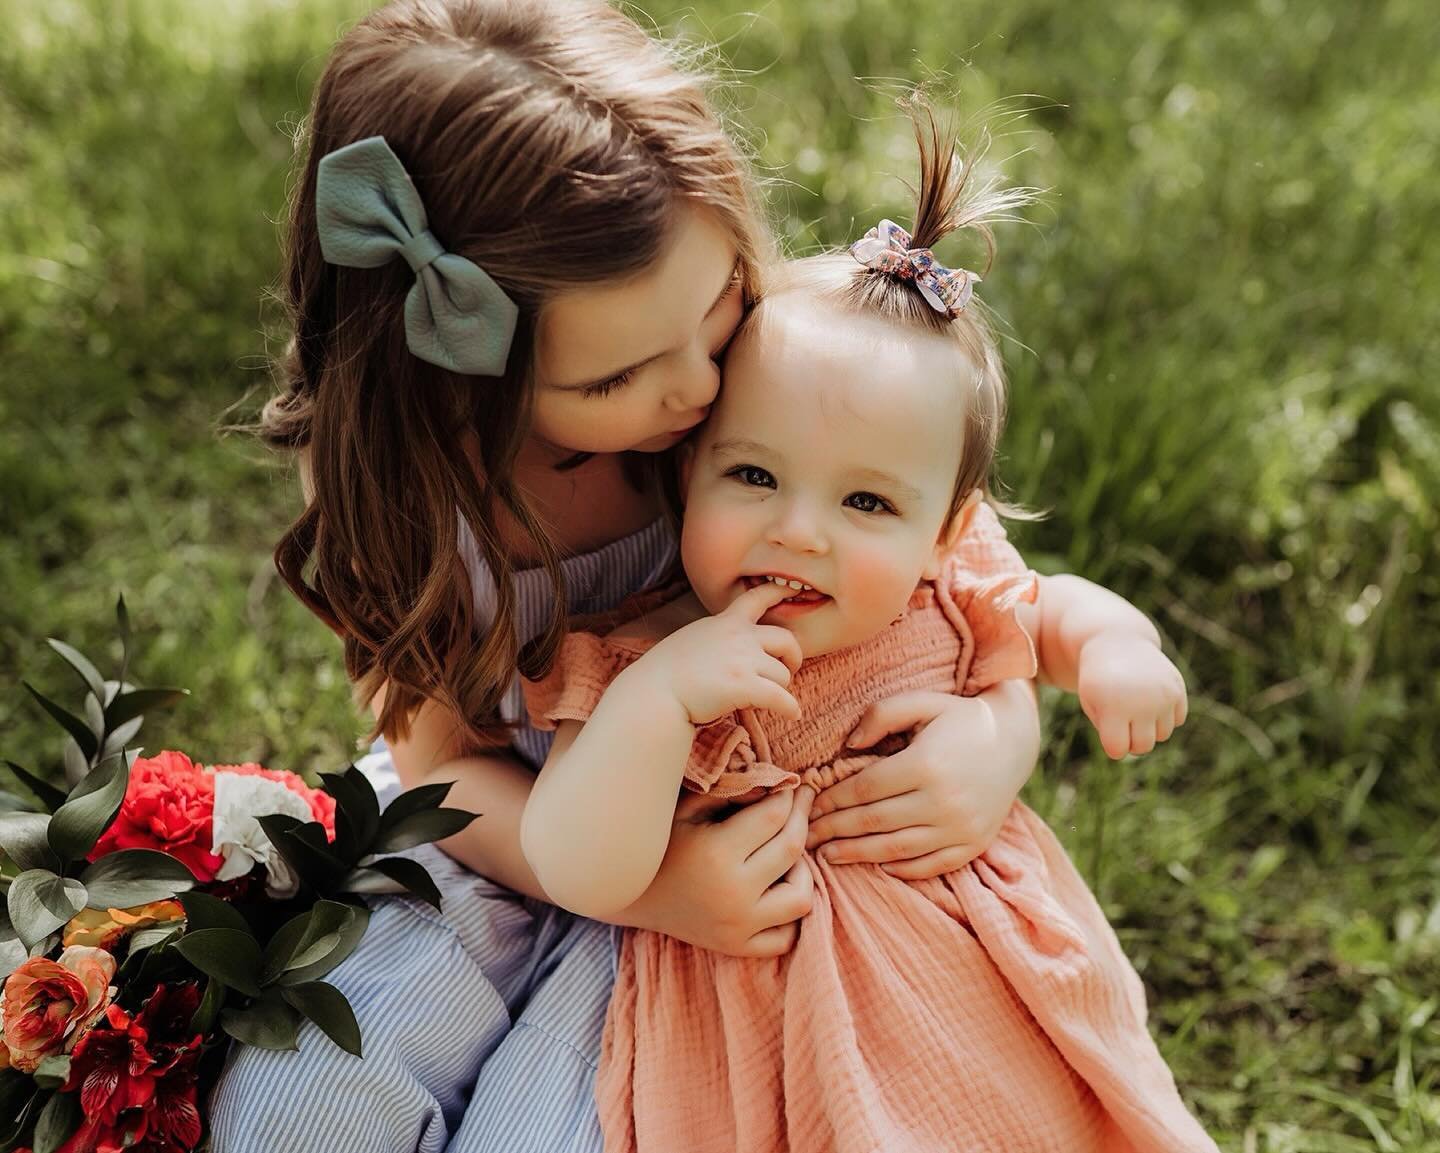 Next up in the flower garden sessions are these cutie sisters!!! I absolutely love seeing these girls grow so much. 🪻🌼🌷🌸 #robinhansenphotography @gracegardensfloral